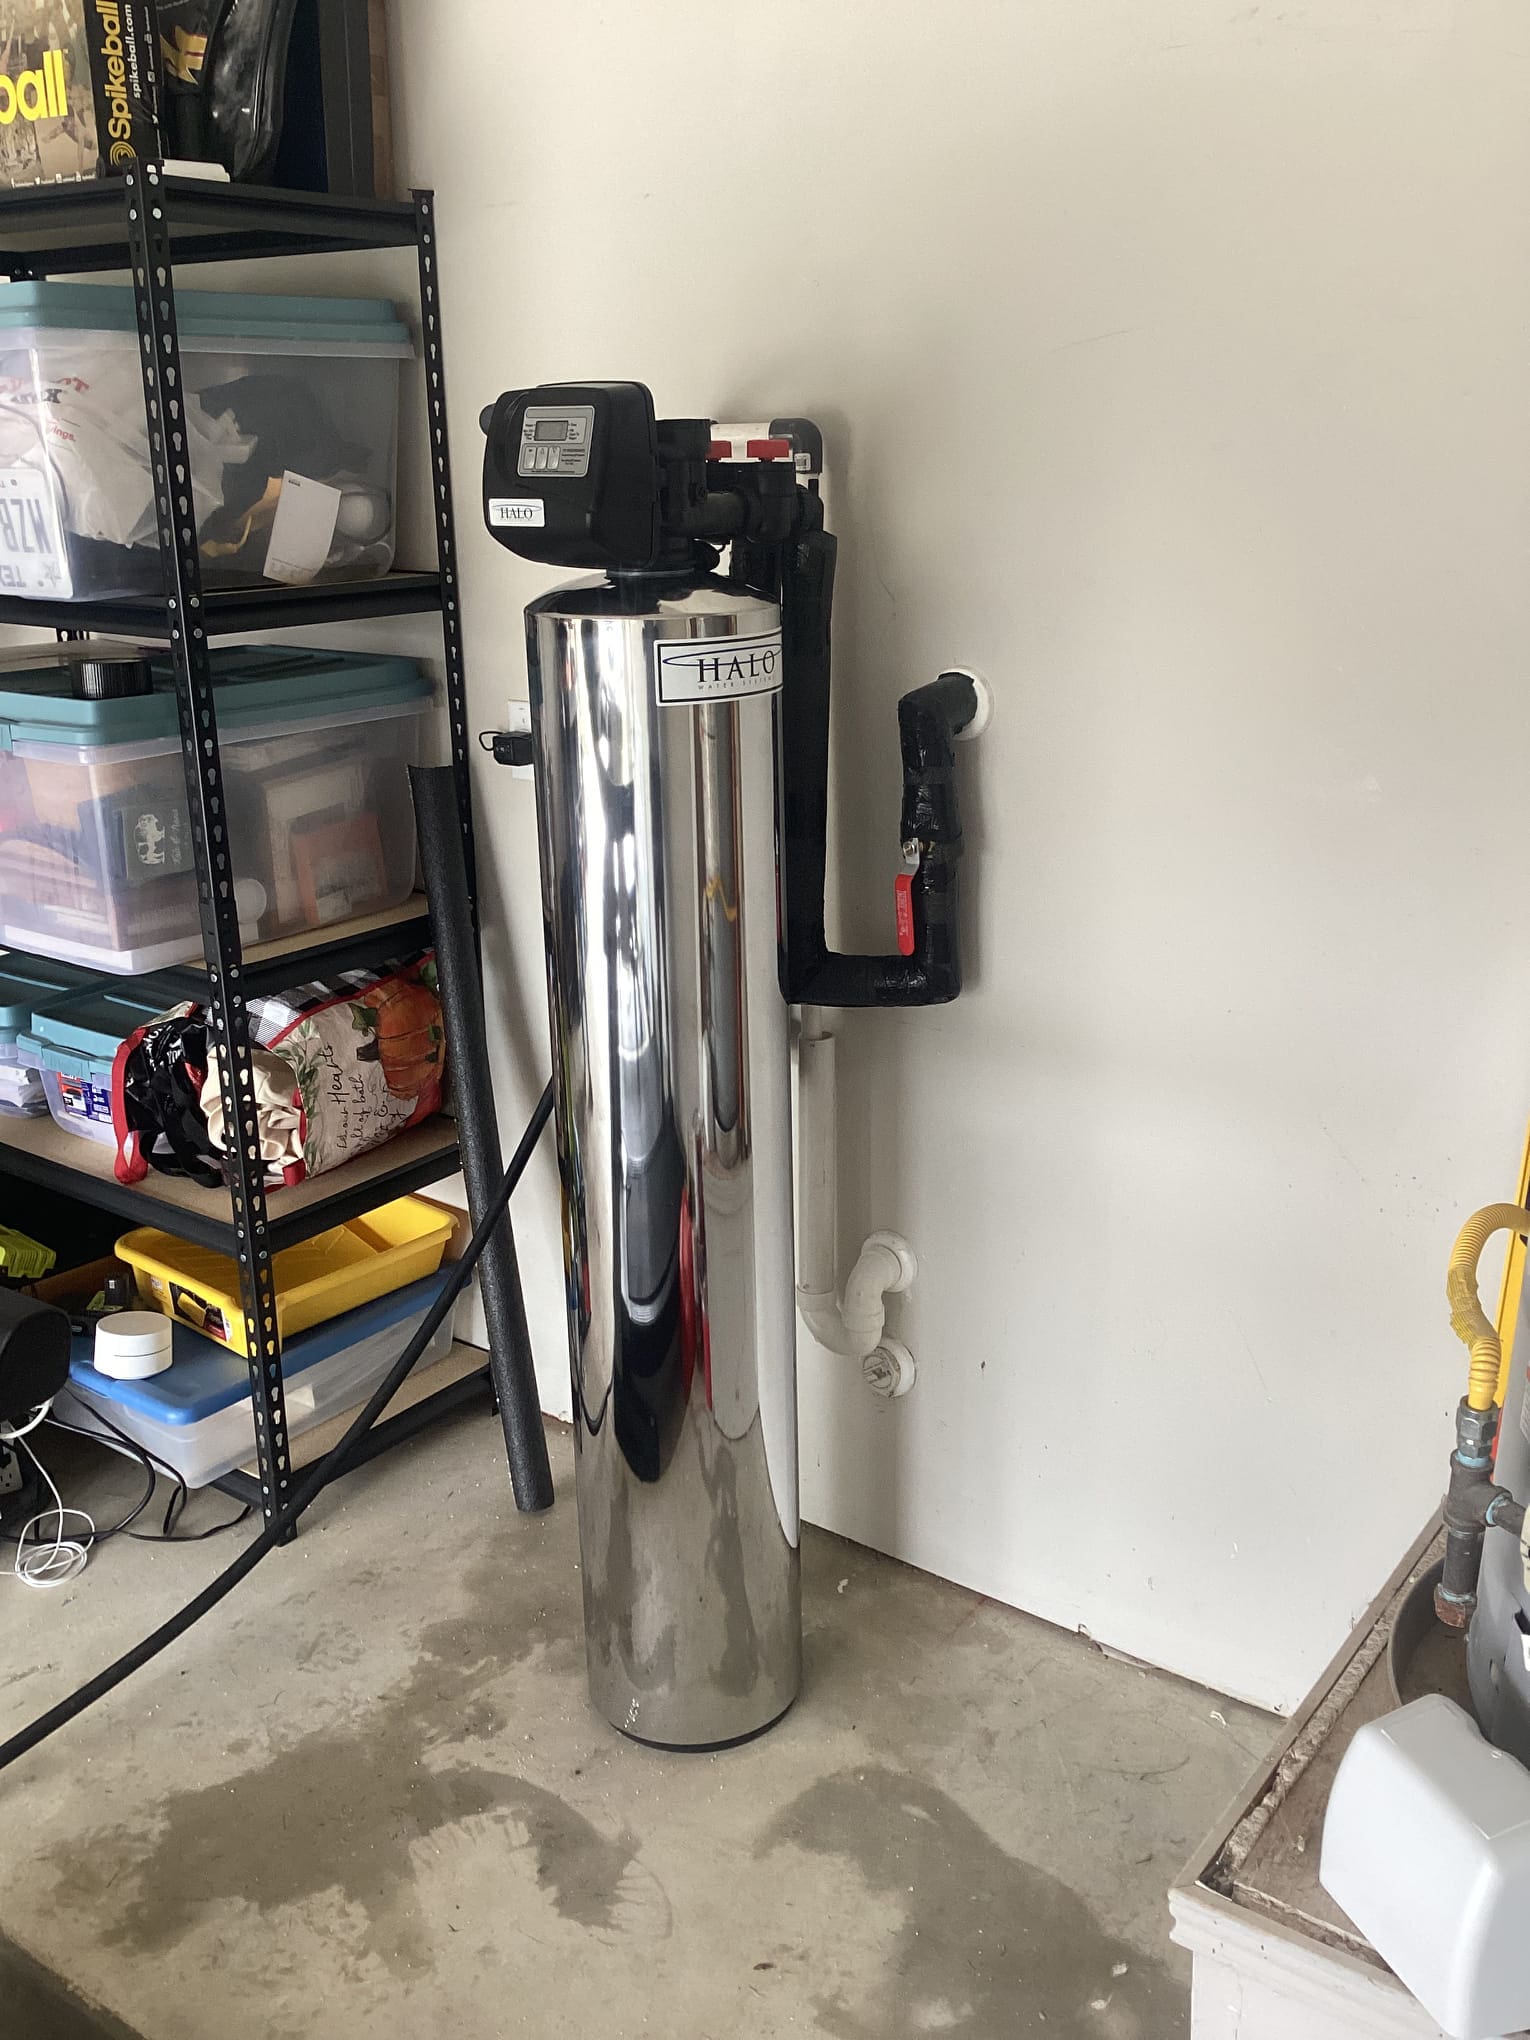 Halo Ion in the ground in a local Texas home. Emergency plumbing for water heaters.